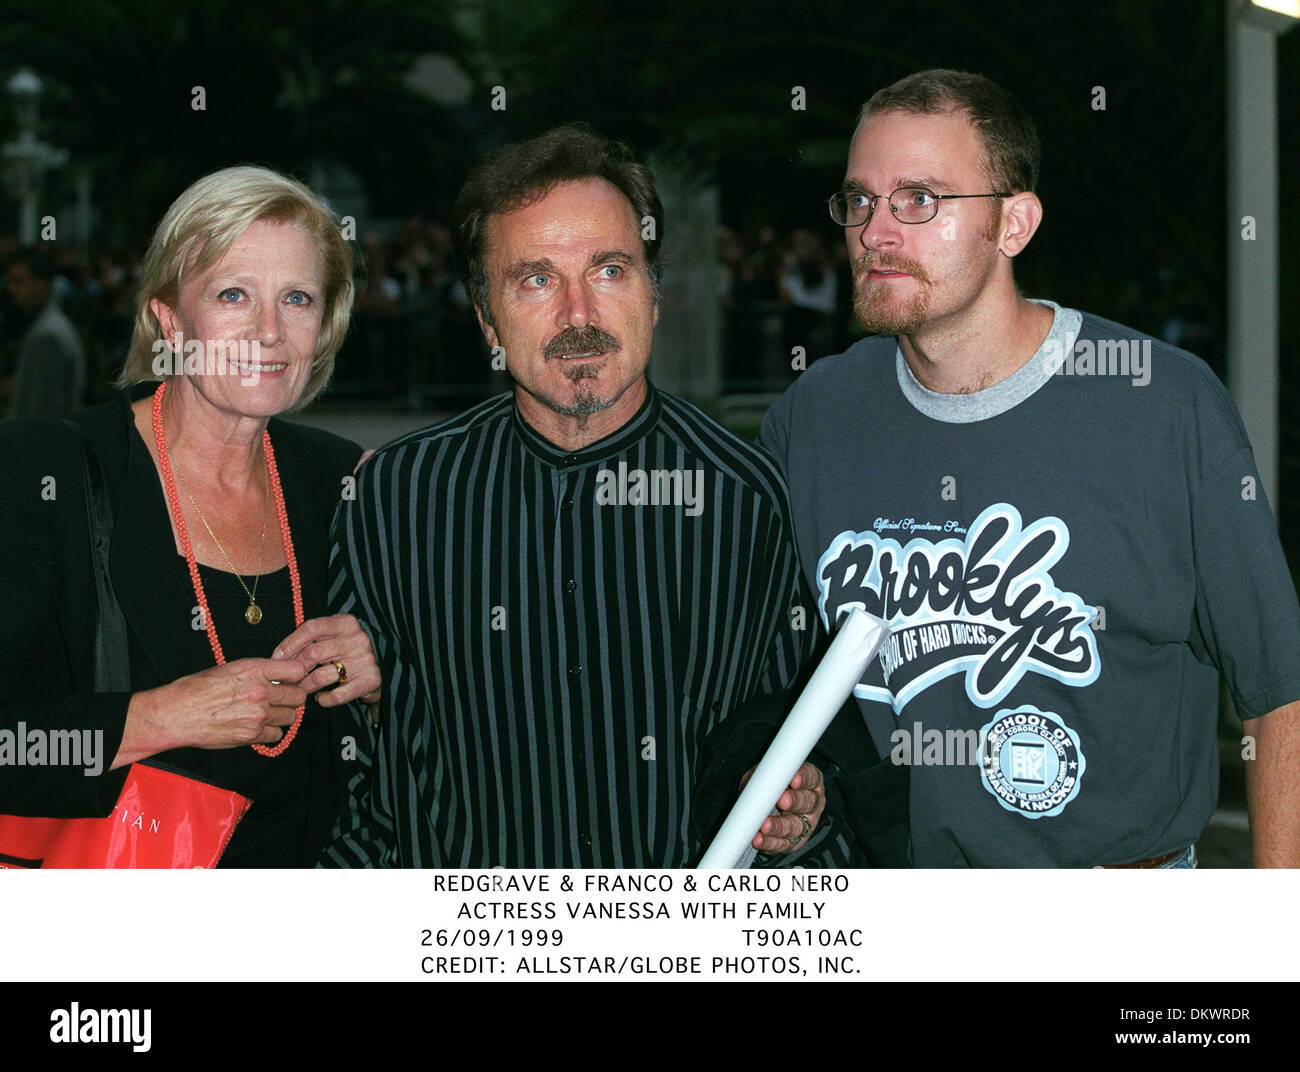 REDGRAVE & FRANCO & CARLO NERO.ACTRESS VANESSA WITH FAMILY.26/09/1999.T90A10AC. Stock Photo